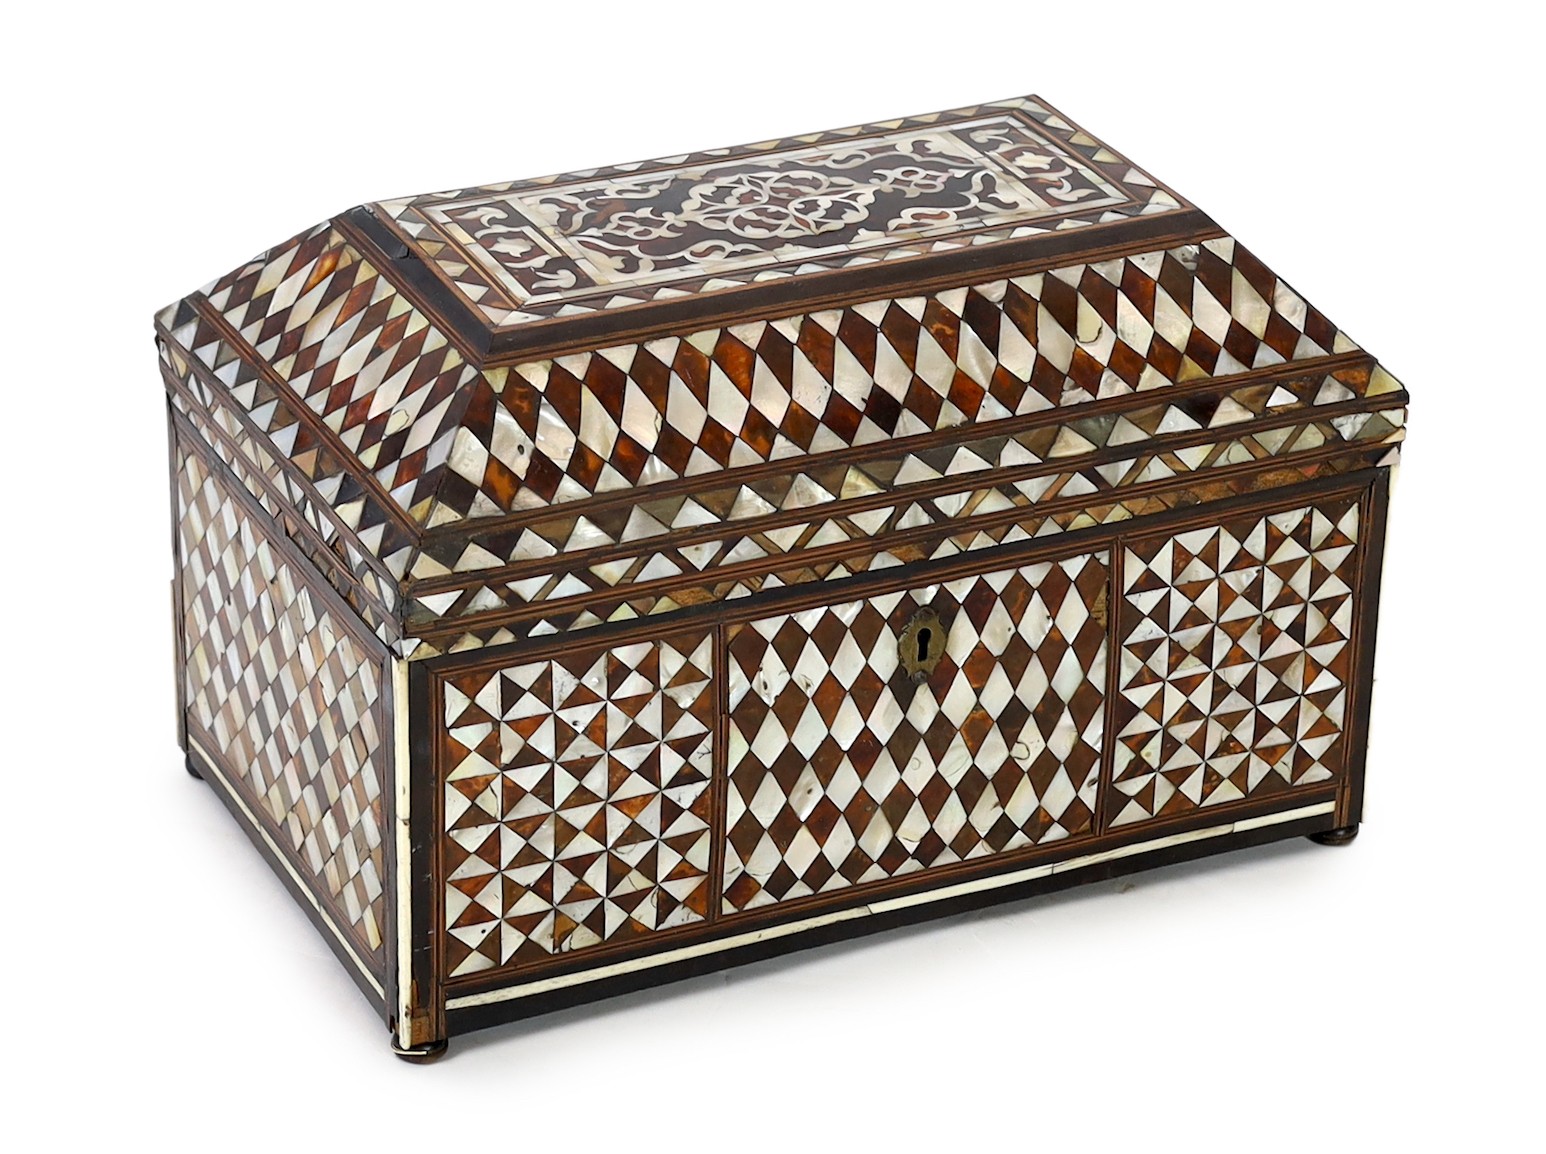 A late 18th/early 19th century Ottoman tortoiseshell and mother-of-pearl scribe’s casket, 49cm wide 30cm deep 31cm high                                                                                                     